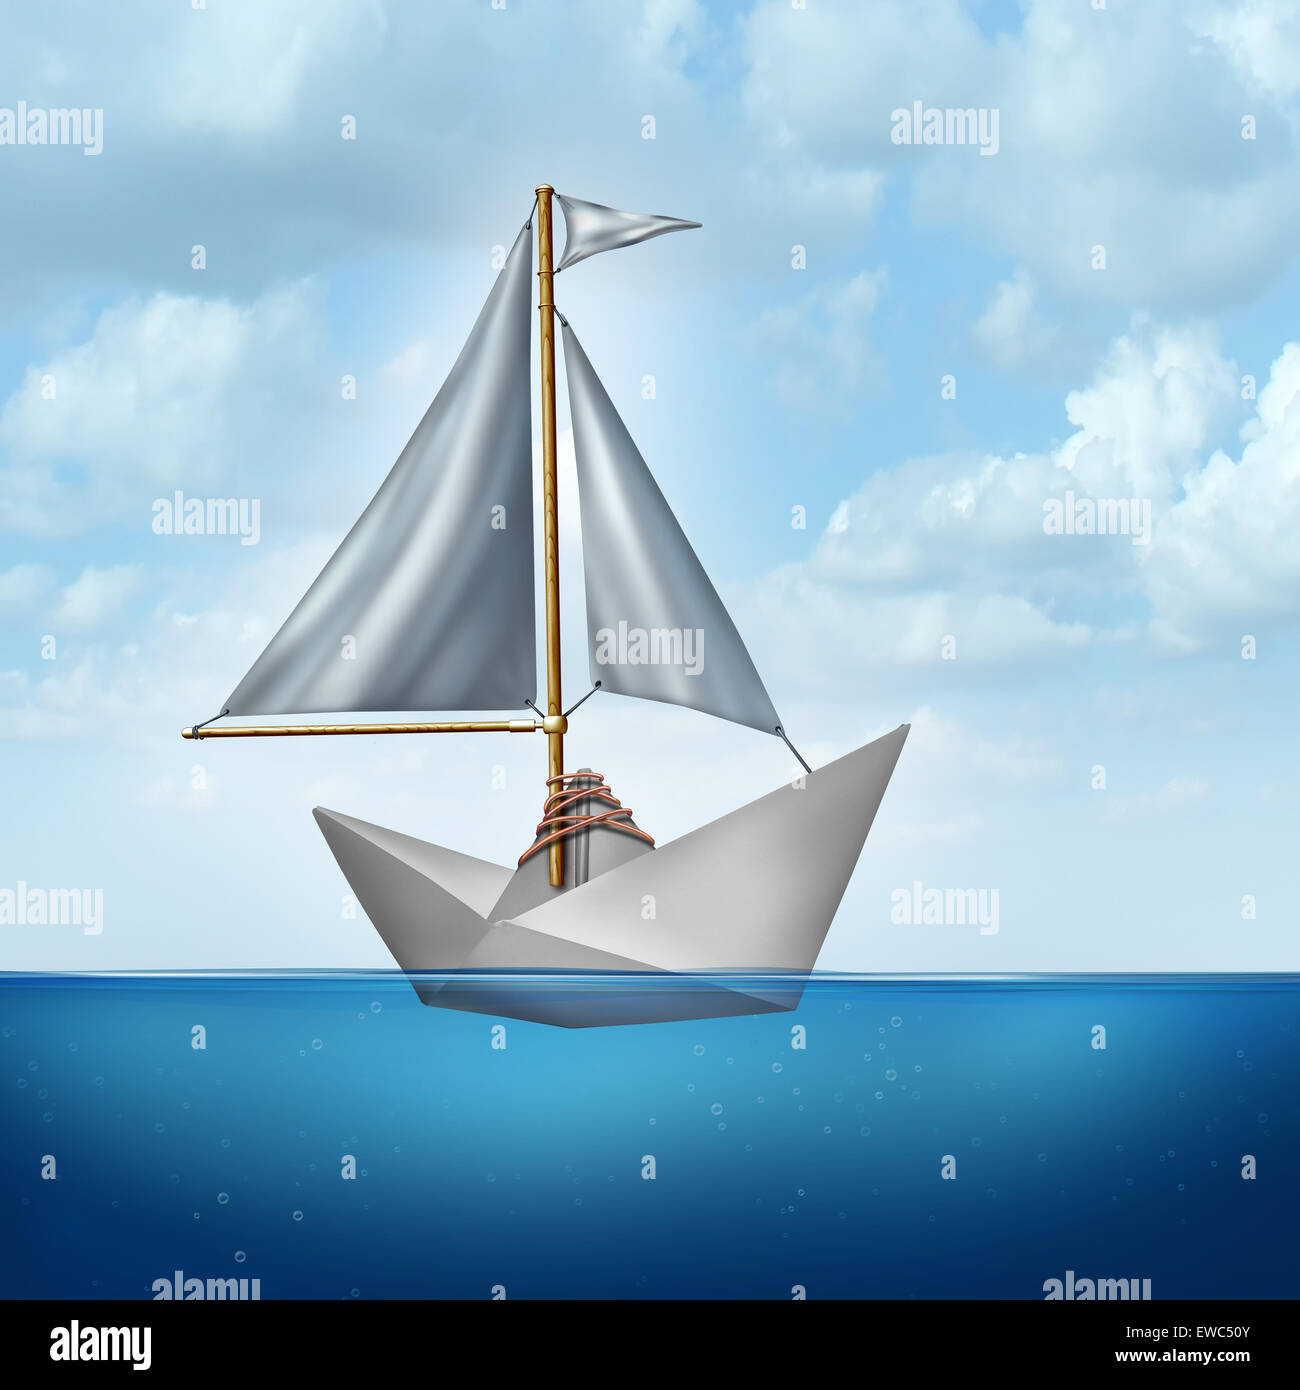 Upgrade your skills concept and improve abilities symbol as a boat sail tied to a paper boat as an upgrading and advancement metaphor for strategic innovation to succeed with change. Stock Photo